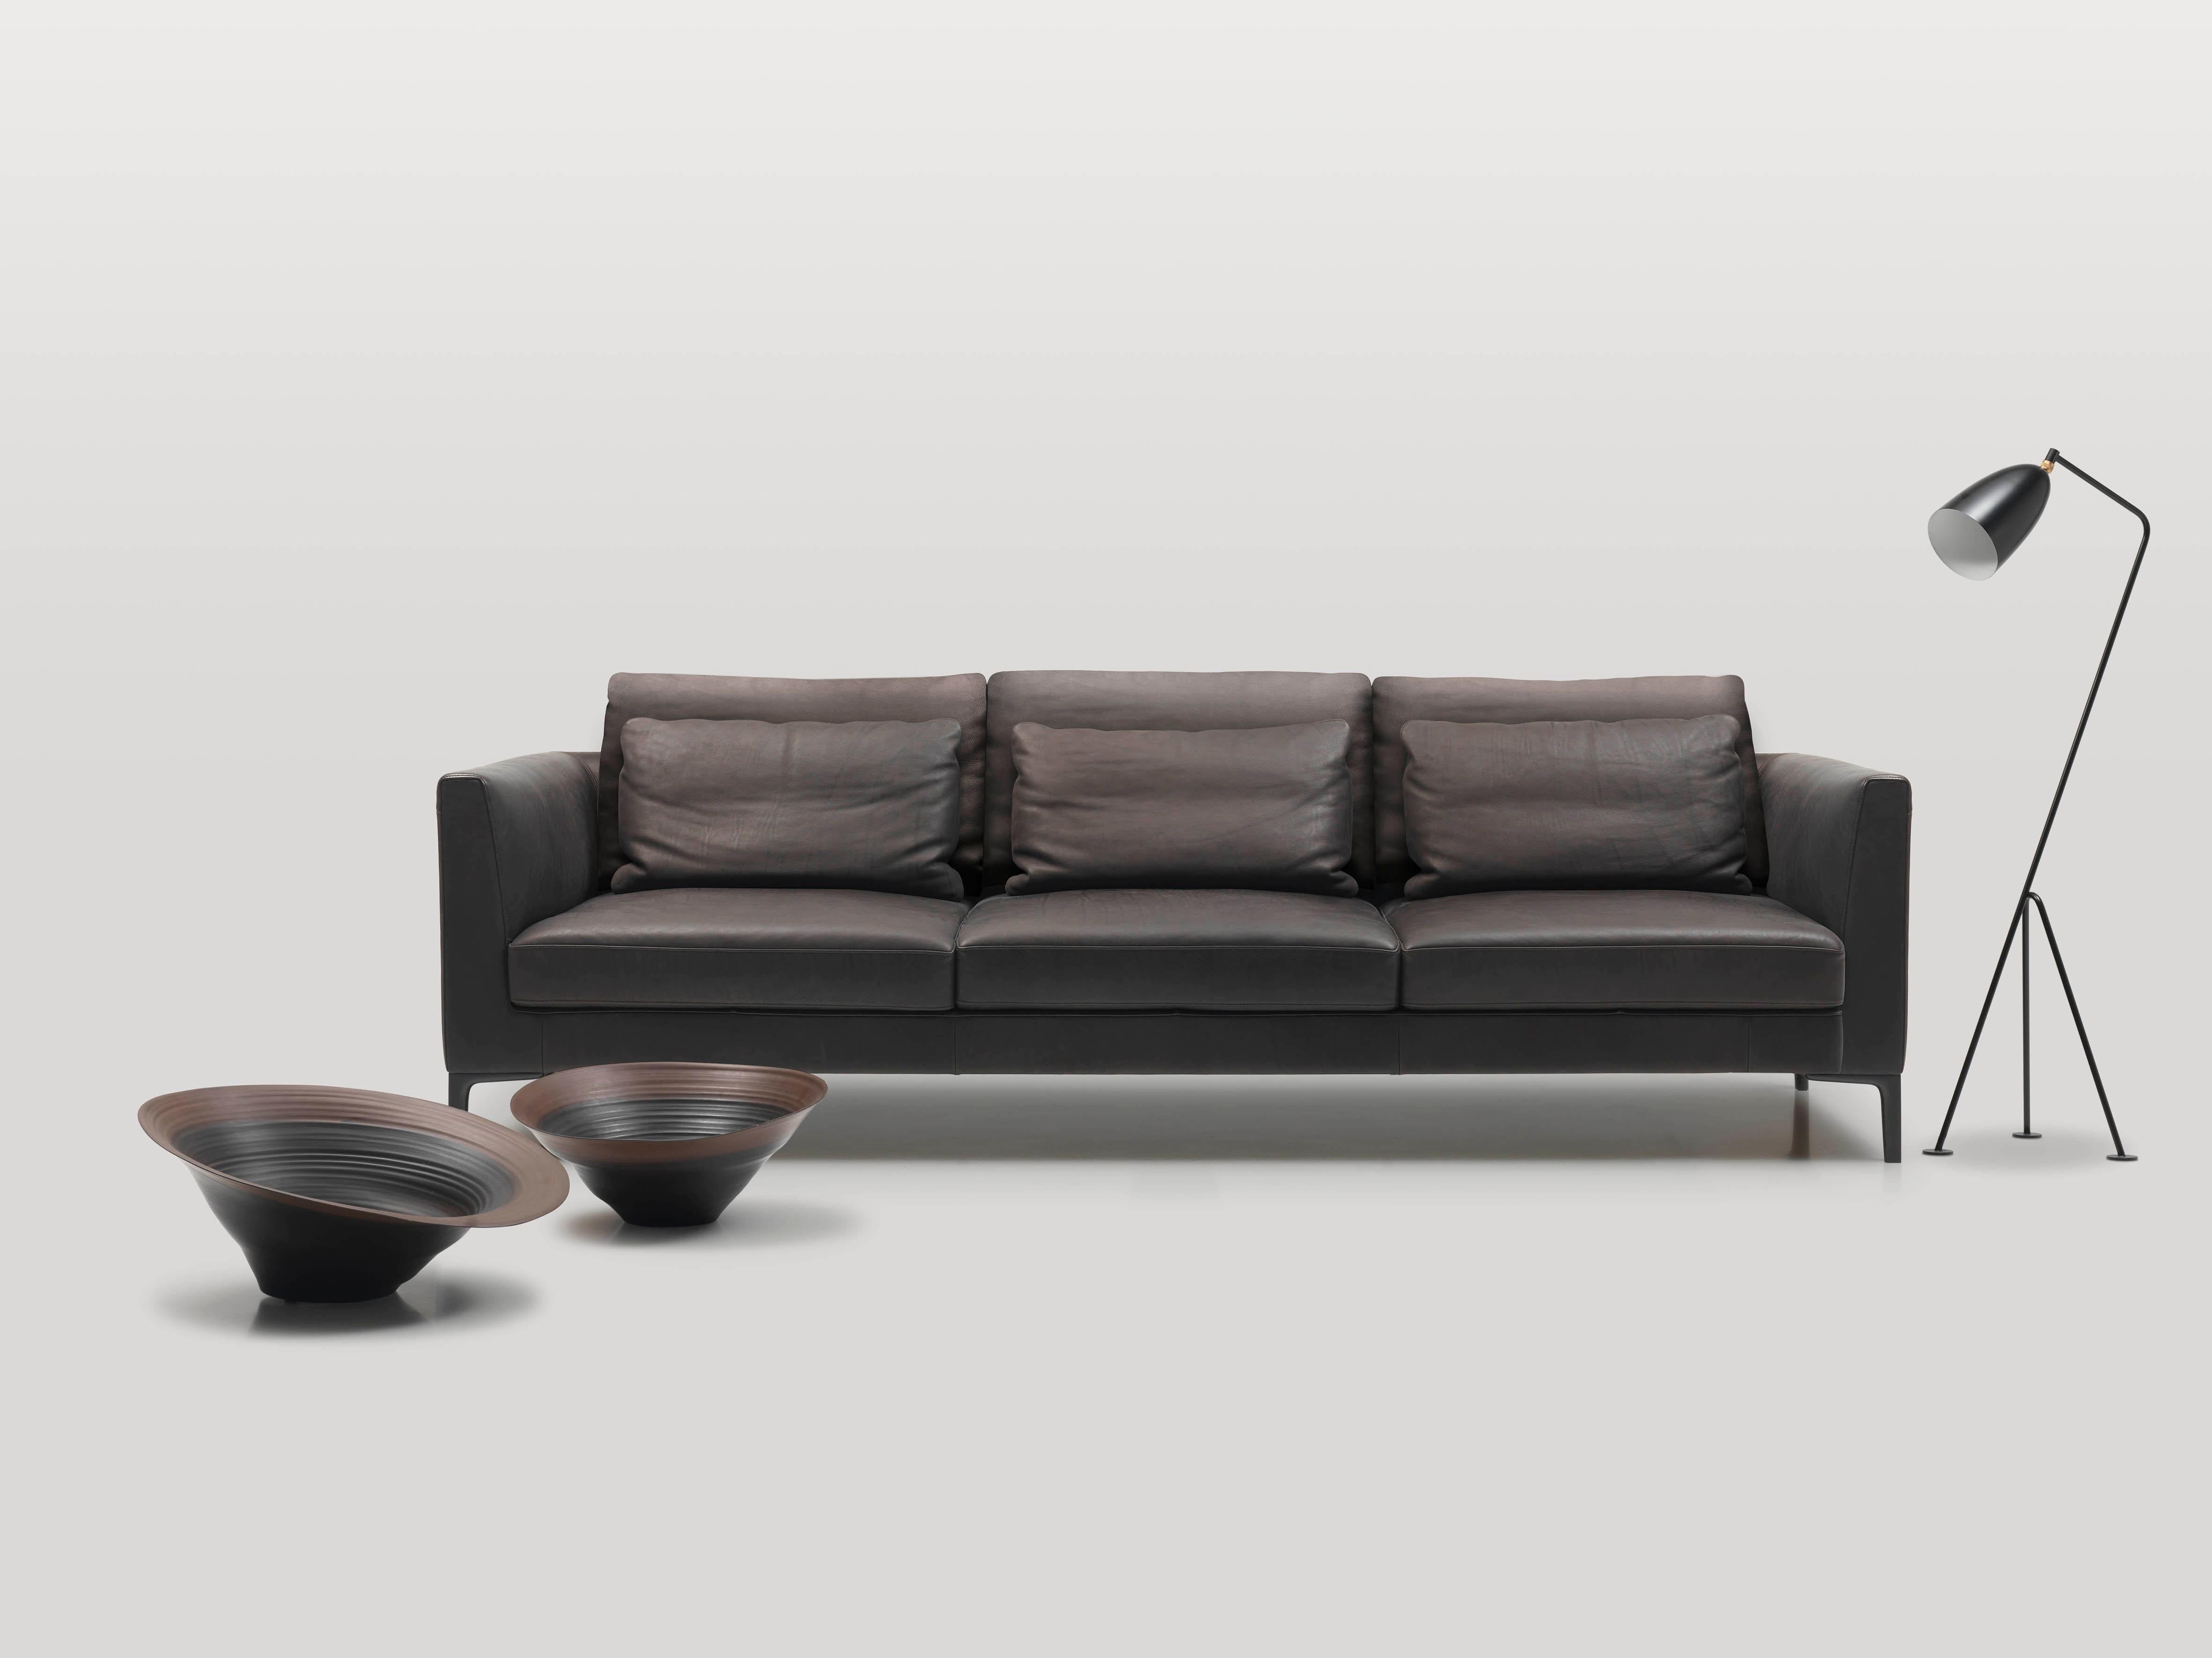 DS-49/03 3-seat sofa by De Sede. 

Technical details:
Standard configuration: Back cushion and cushion in leather. Legs polished aluminium.
Upholstery and Assembly: stabile compact frame made from solid beech and board material. Belted